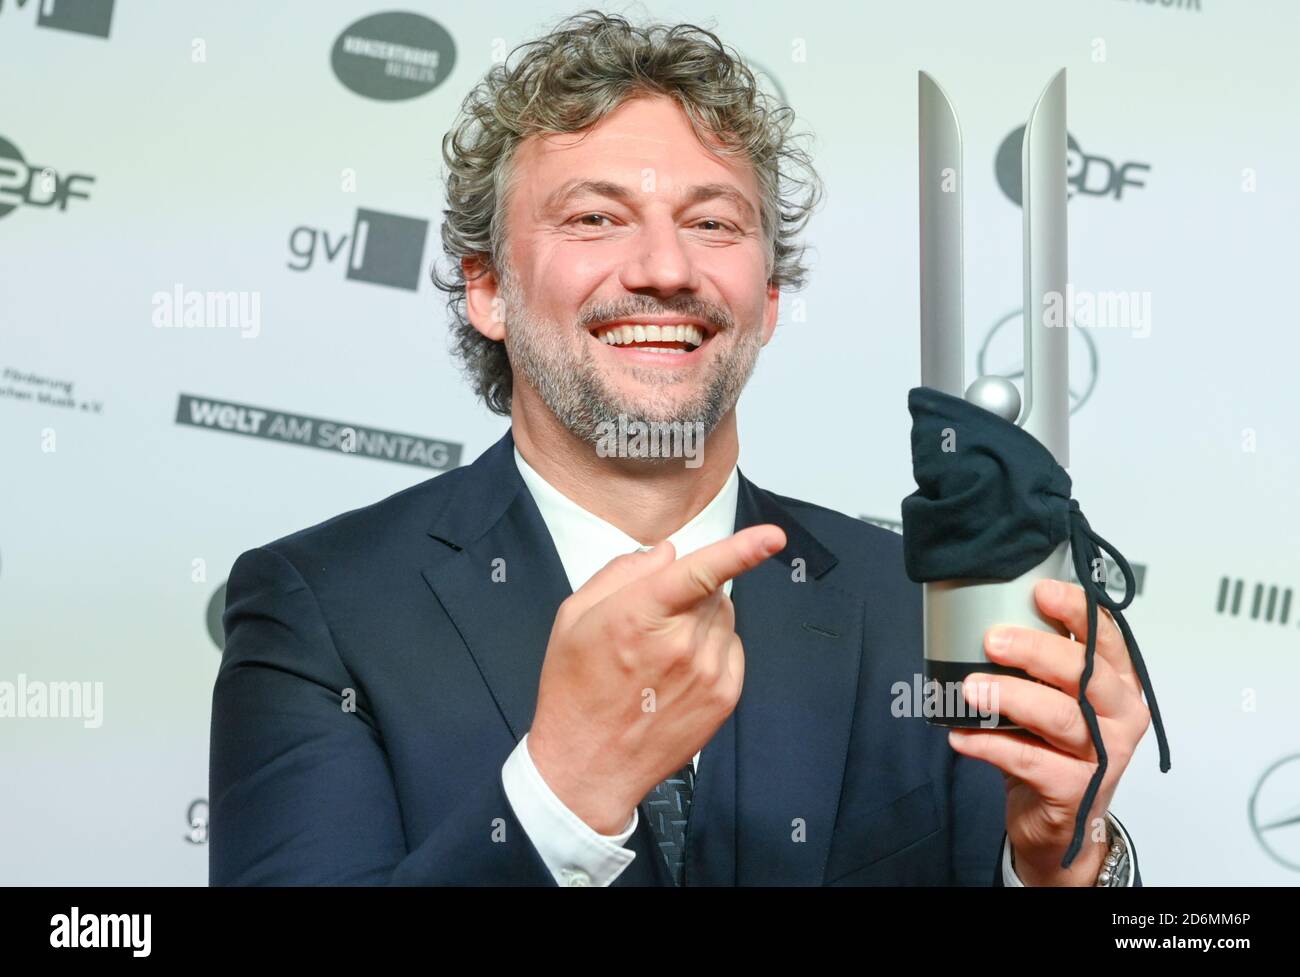 Berlin, Germany. 18th Oct, 2020. The opera singer Jonas Kaufmann will present his prize at the Opus Klassik 2020 music award ceremony at the Konzerthaus am Gendarmenmarkt. He has tied his mouth and nose protection around it. Jonas Kaufmann receives the award for his album 'Vienna' in the category 'Classic without Borders'. Since 2018, music companies, record labels and concert organizers have been awarding the prize to 47 winners in 25 categories. Credit: Jens Kalaene/dpa-Zentralbild/dpa/Alamy Live News Stock Photo